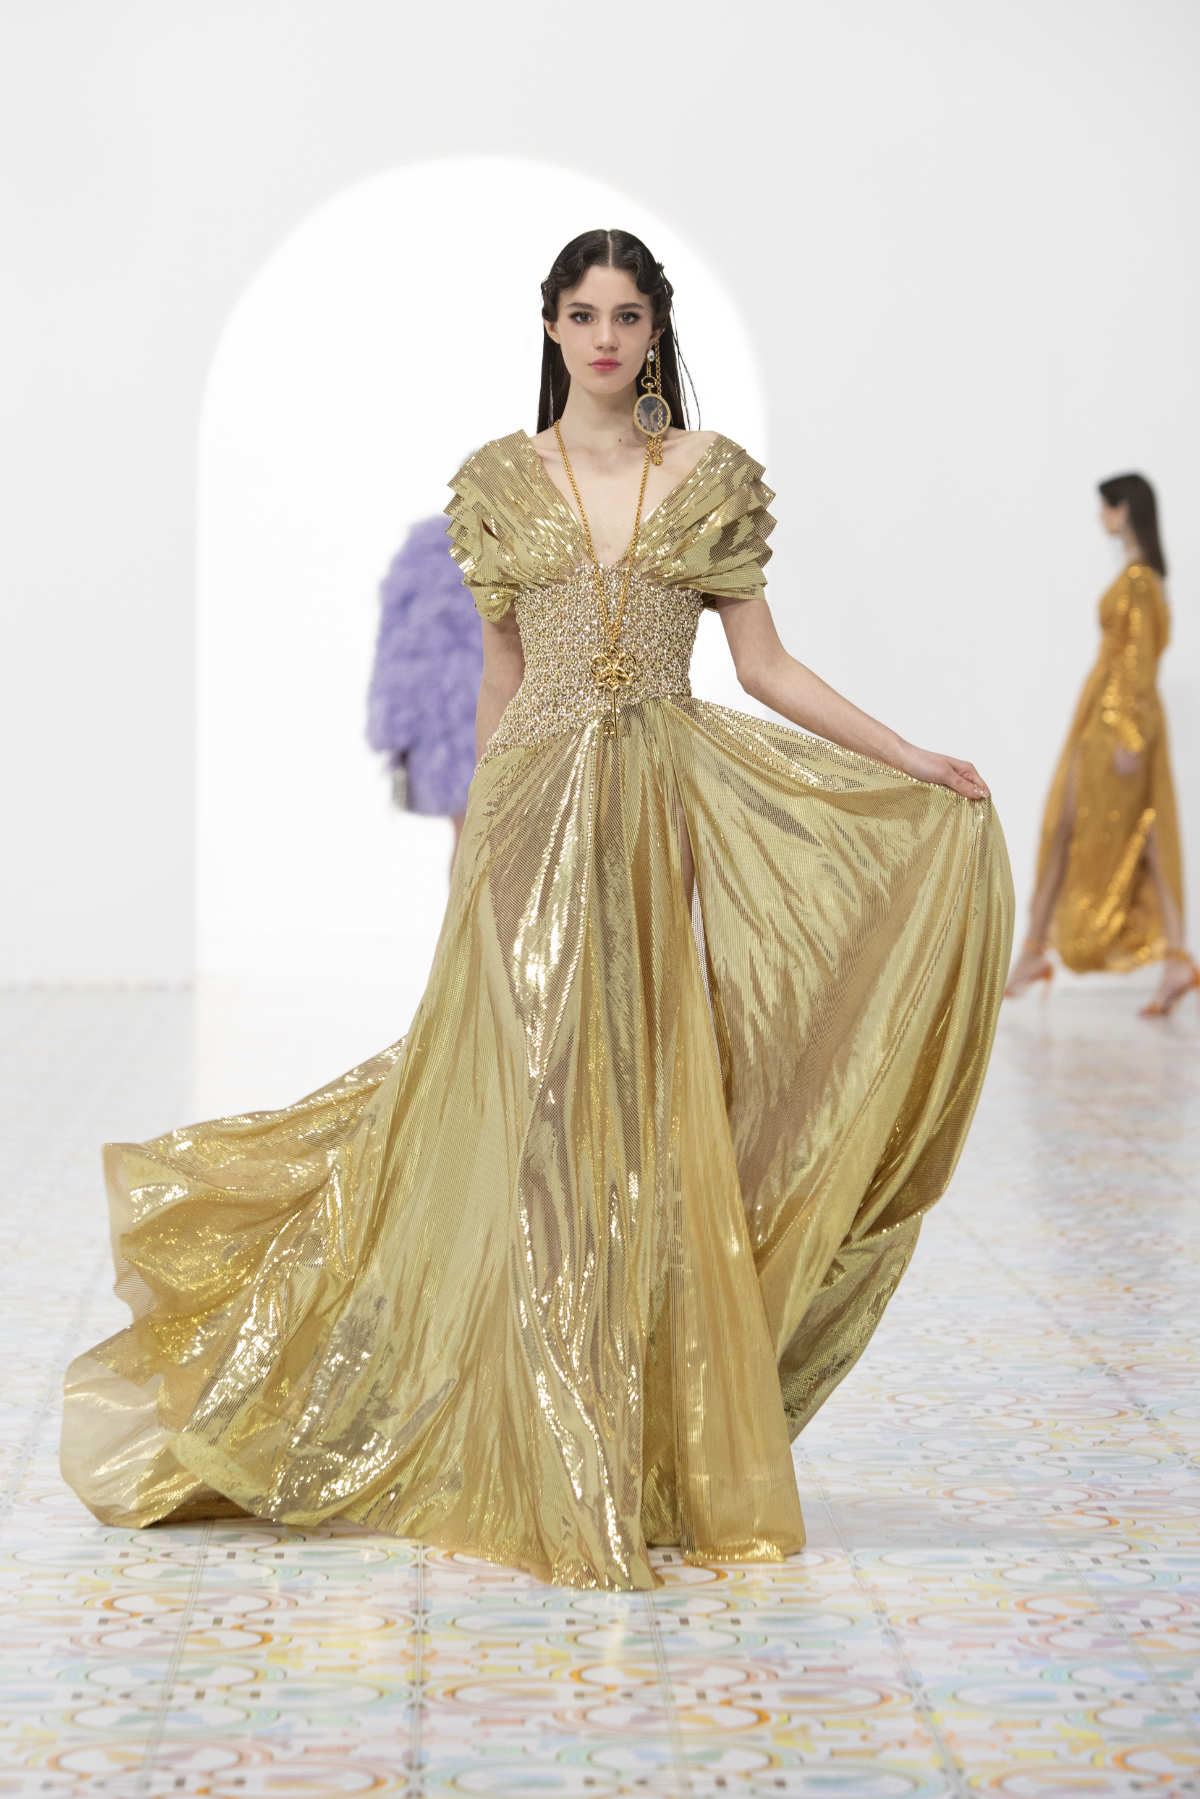 Georges Hobeika Presents Its New Couture Spring Summer 2022 Collection ...